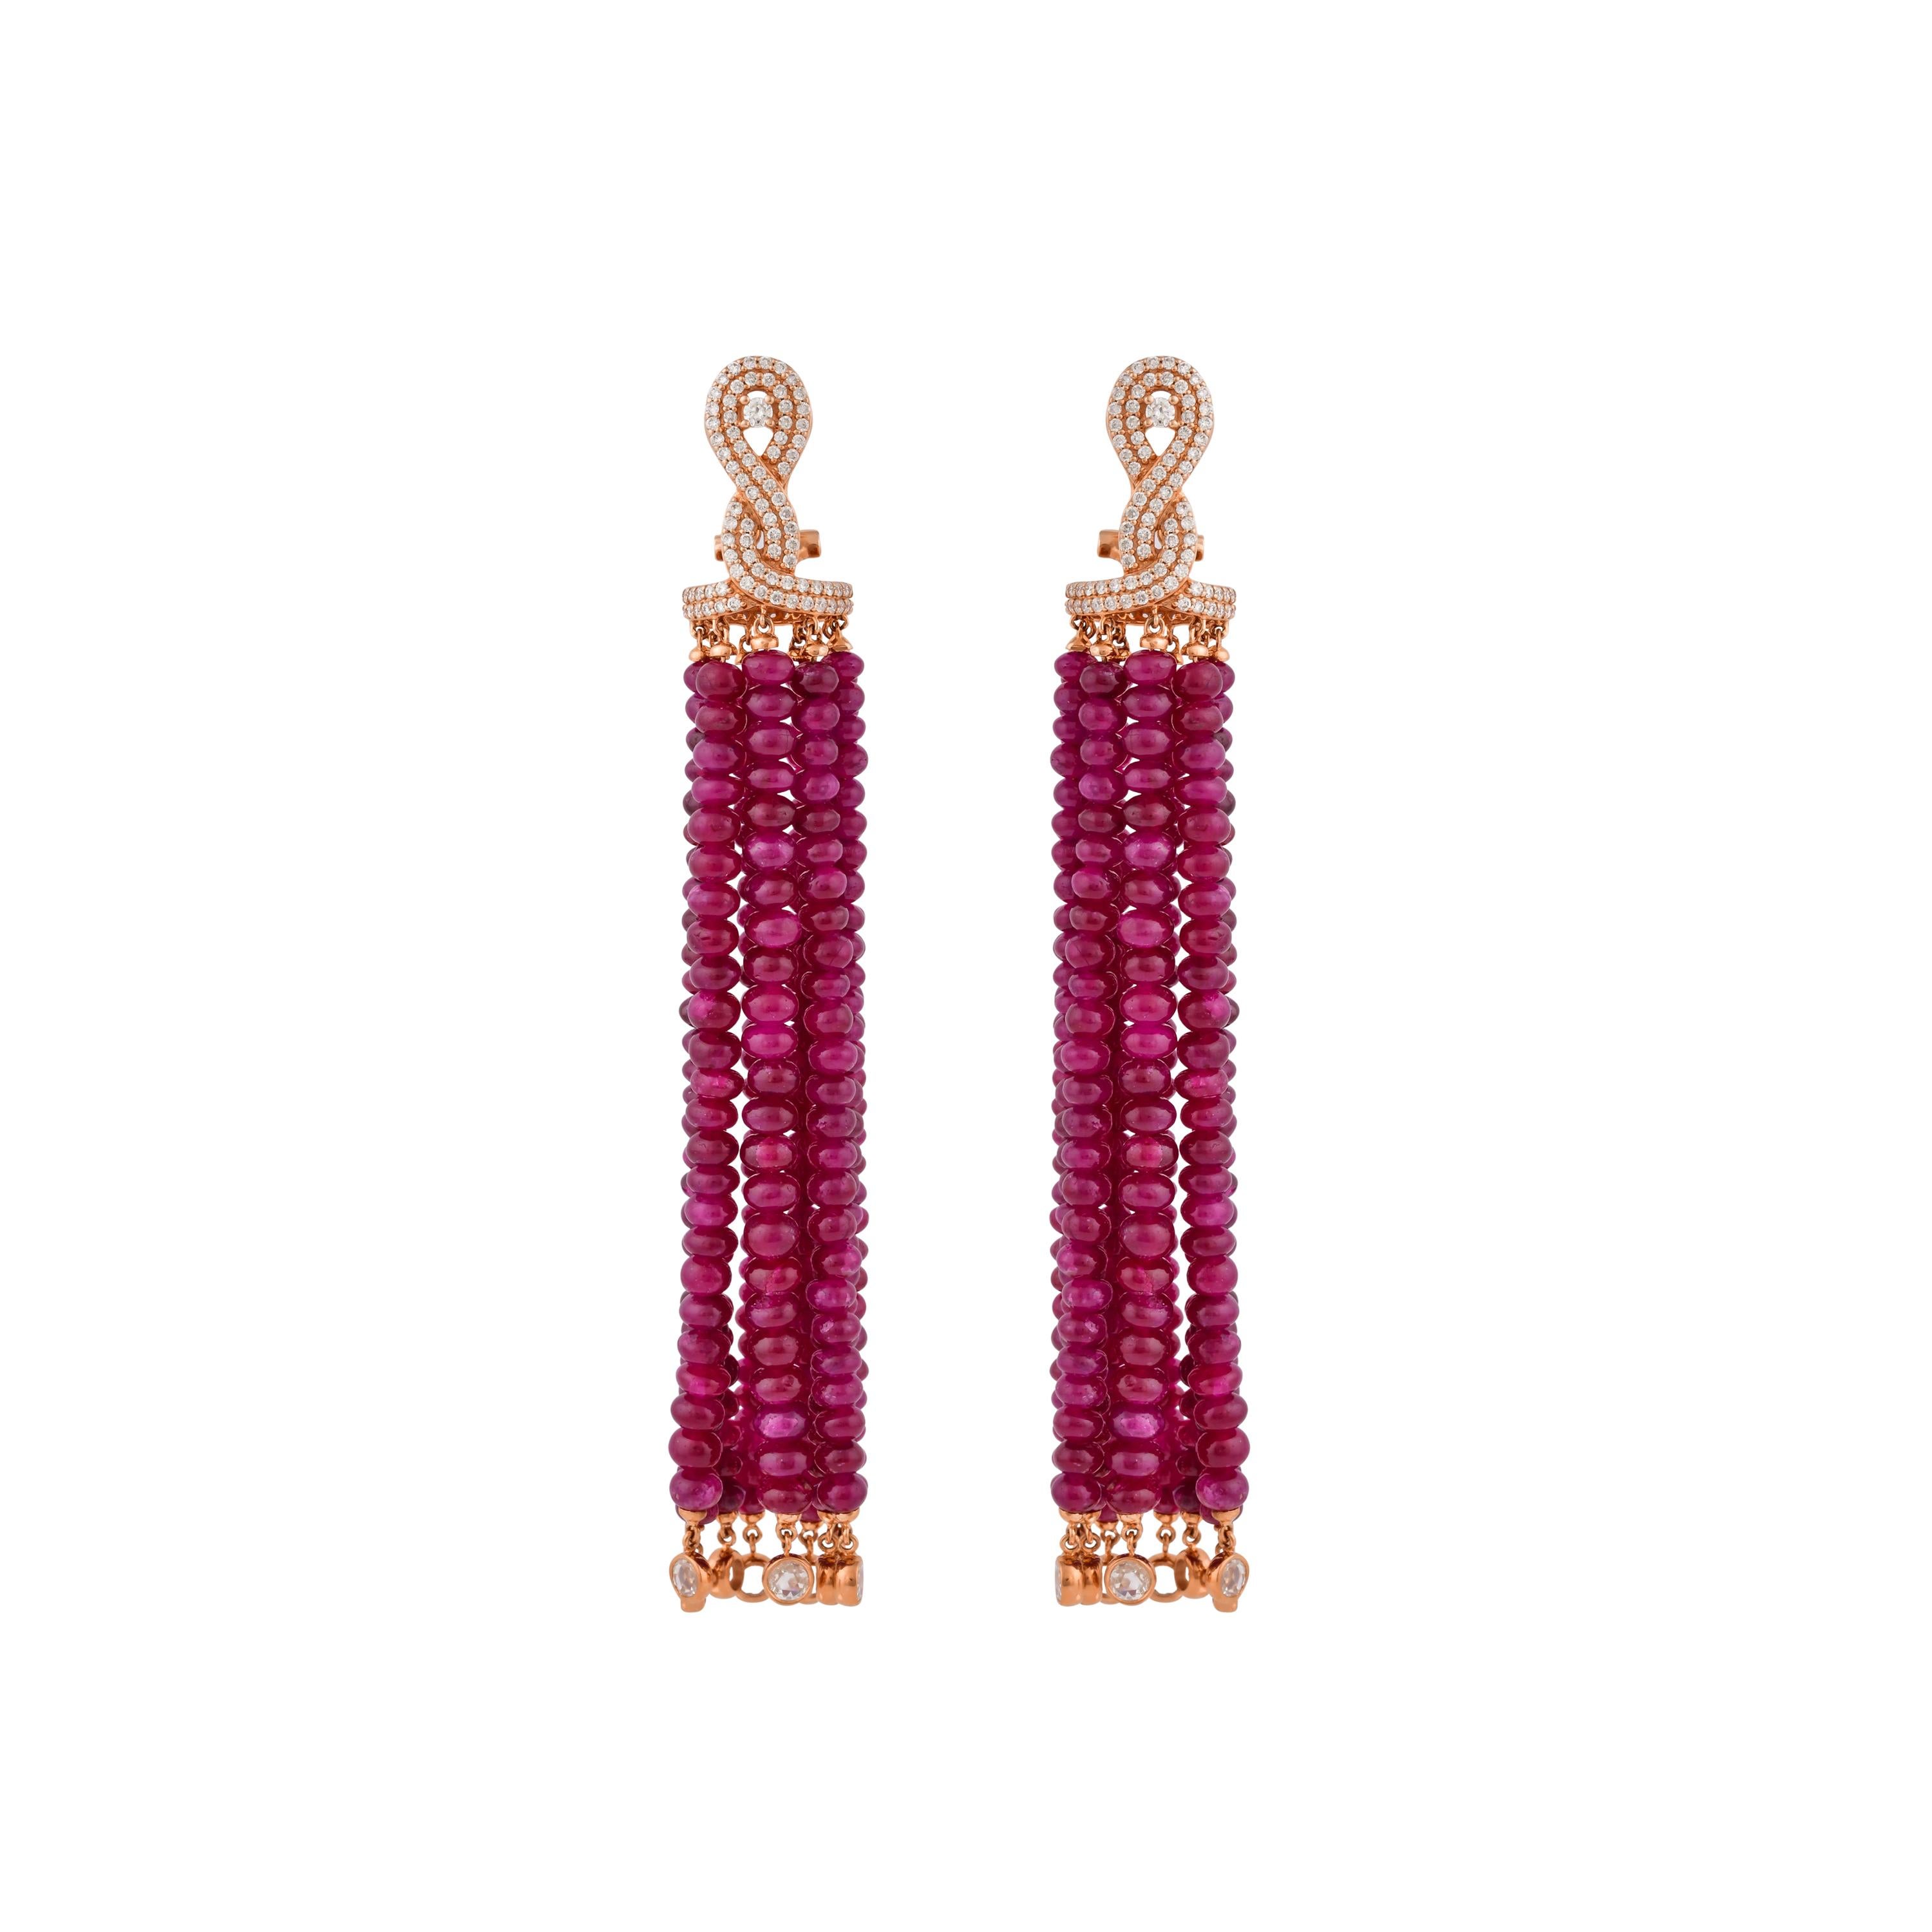 An exclusive collection of designer and unique dangle earrings by Sunita Nahata Fine Design. 

Ruby Dangle Earring in 14 Karat Rose Gold.

Ruby: 129.650 carat, Mix Size, Round Shape.
Diamond: 0.067 carat, 2.00 Size, Round Shape, G colour, VS